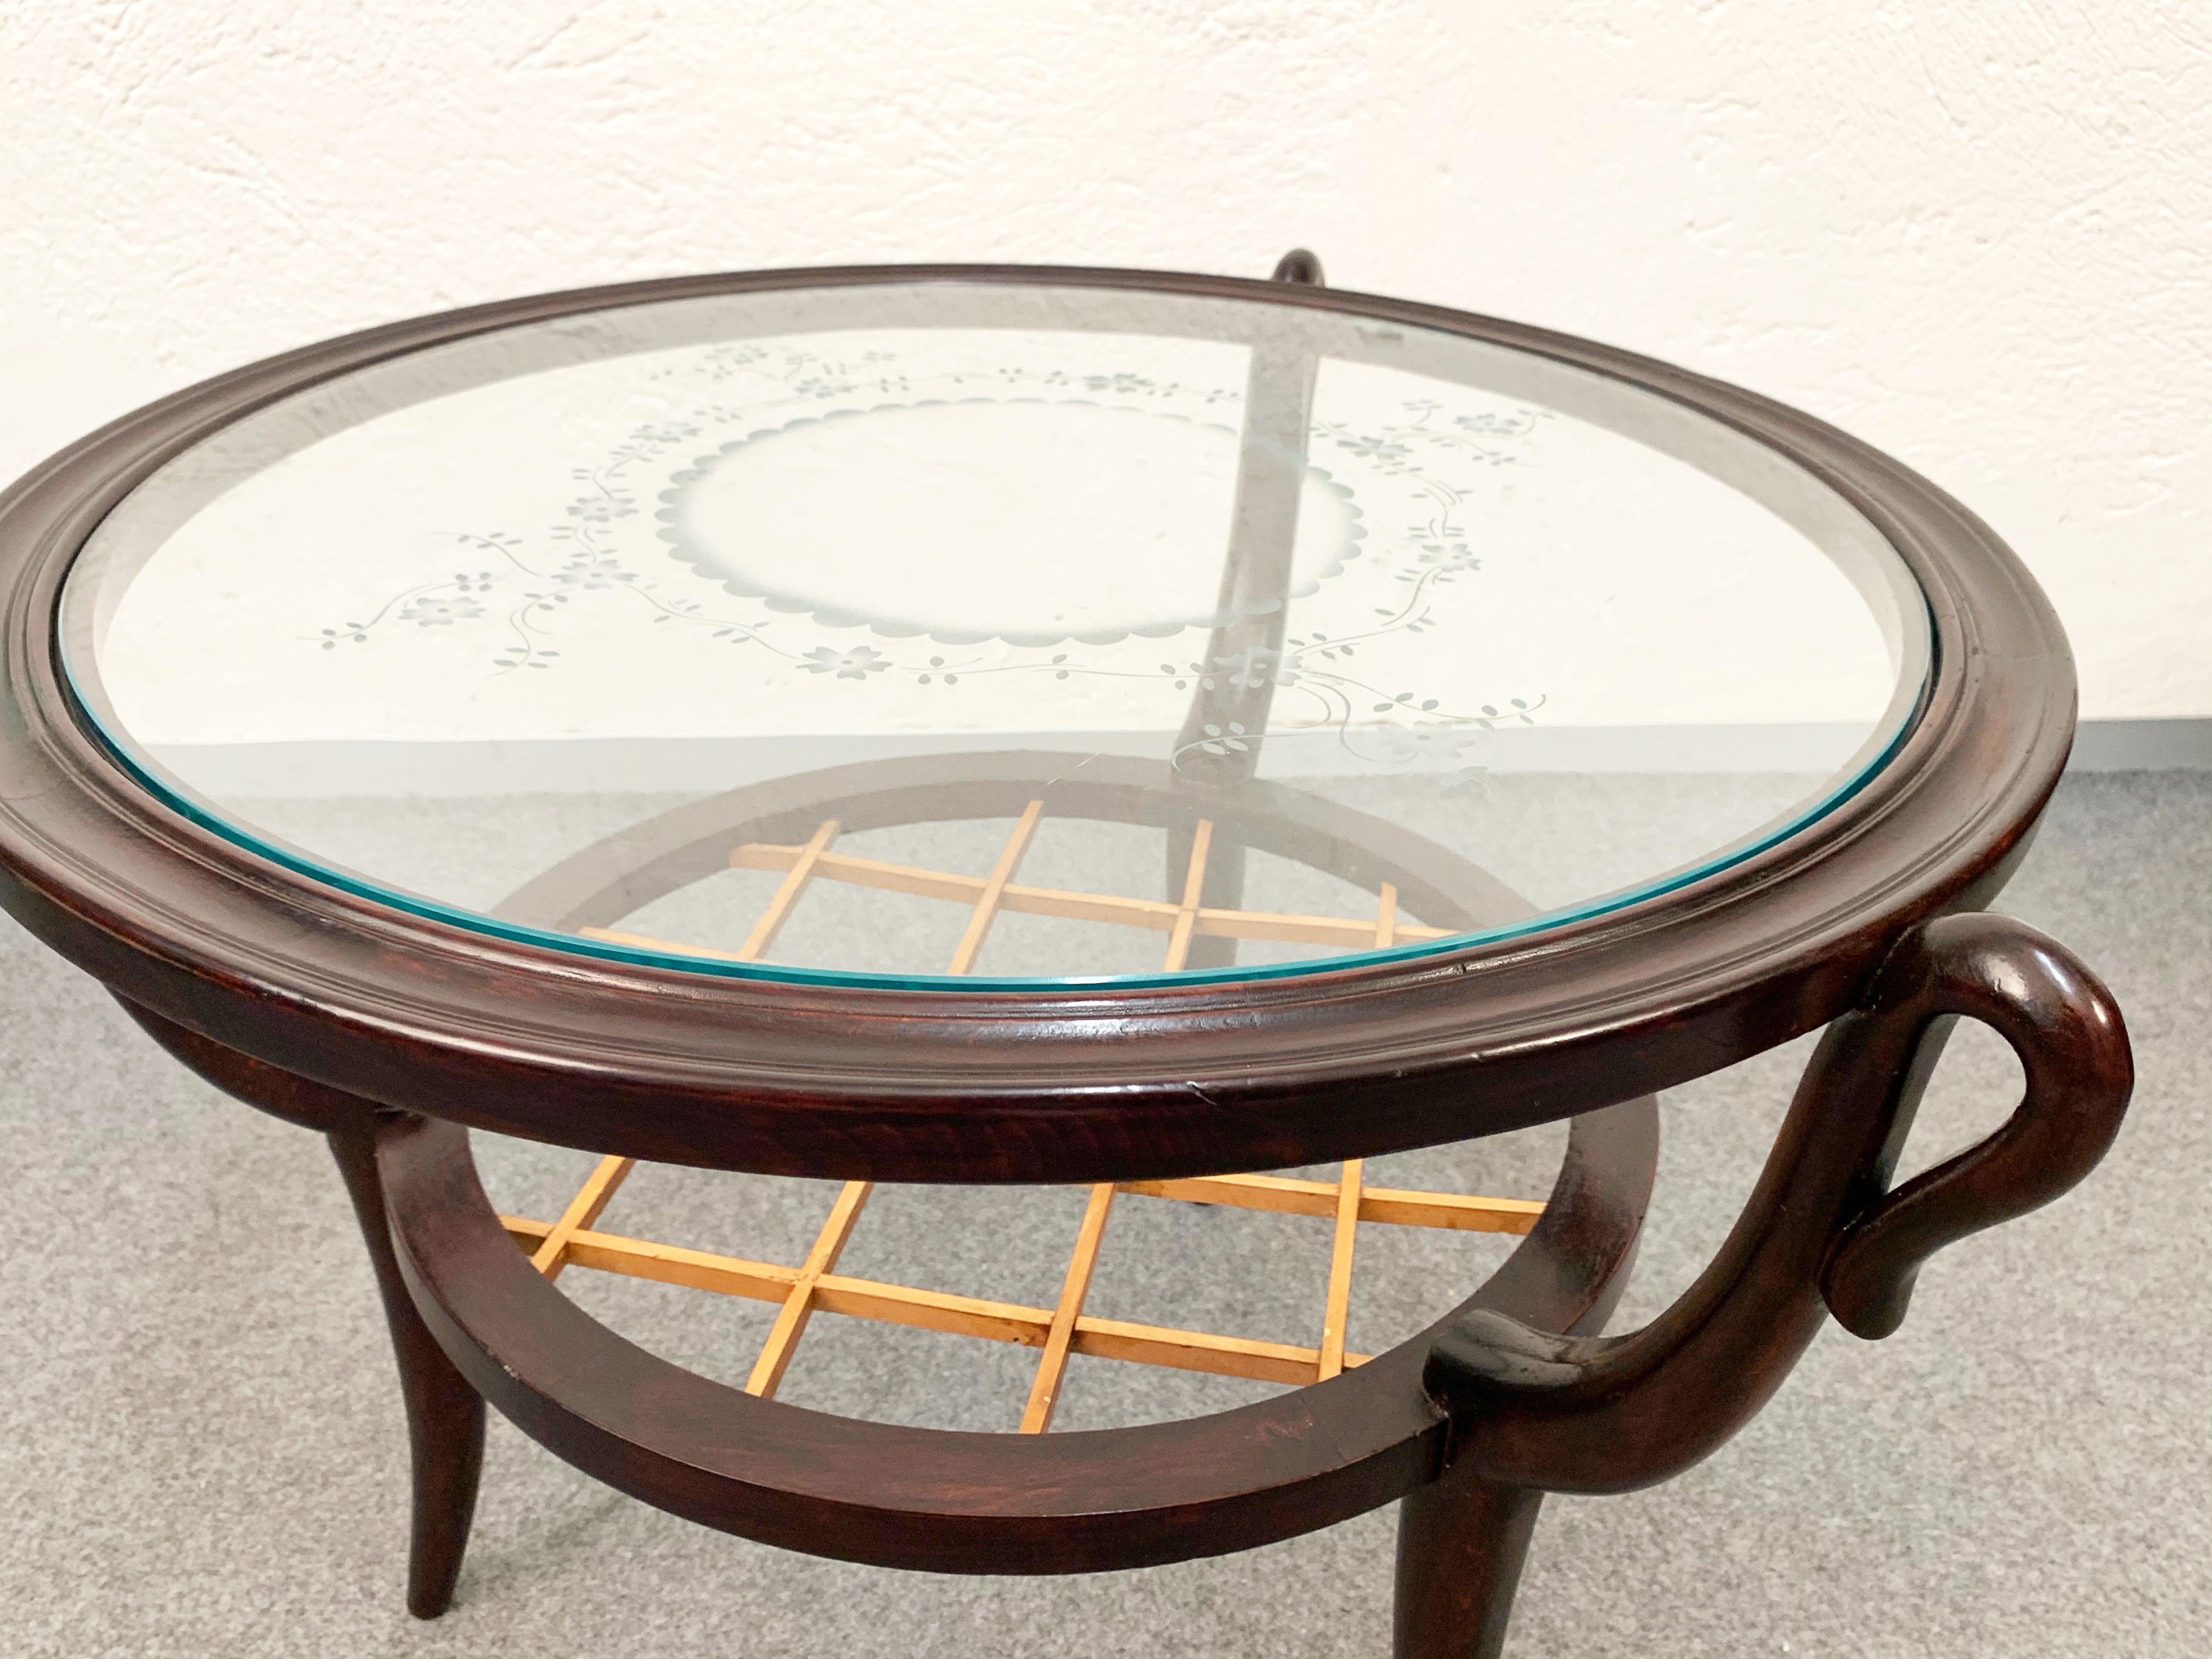 Mid-20th Century Two-level Round Wood and Glass Italian Coffee Table Gio Ponti Style, 1950s For Sale